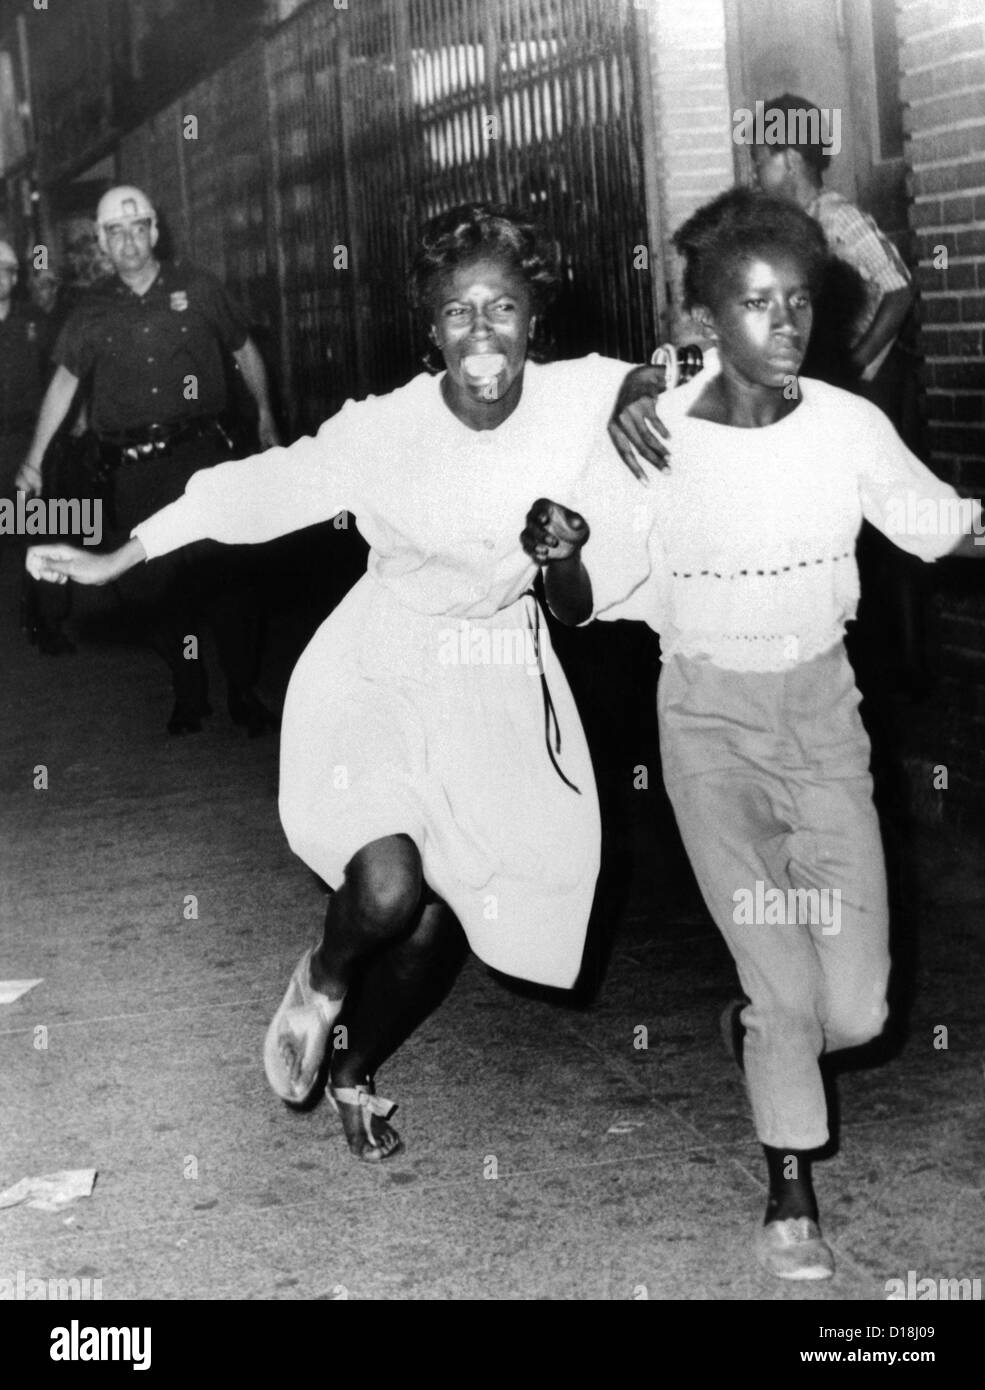 Two young African Americans girls, one screaming during riots in the Bedford-Stuyvesant section of Brooklyn. They were making a Stock Photo